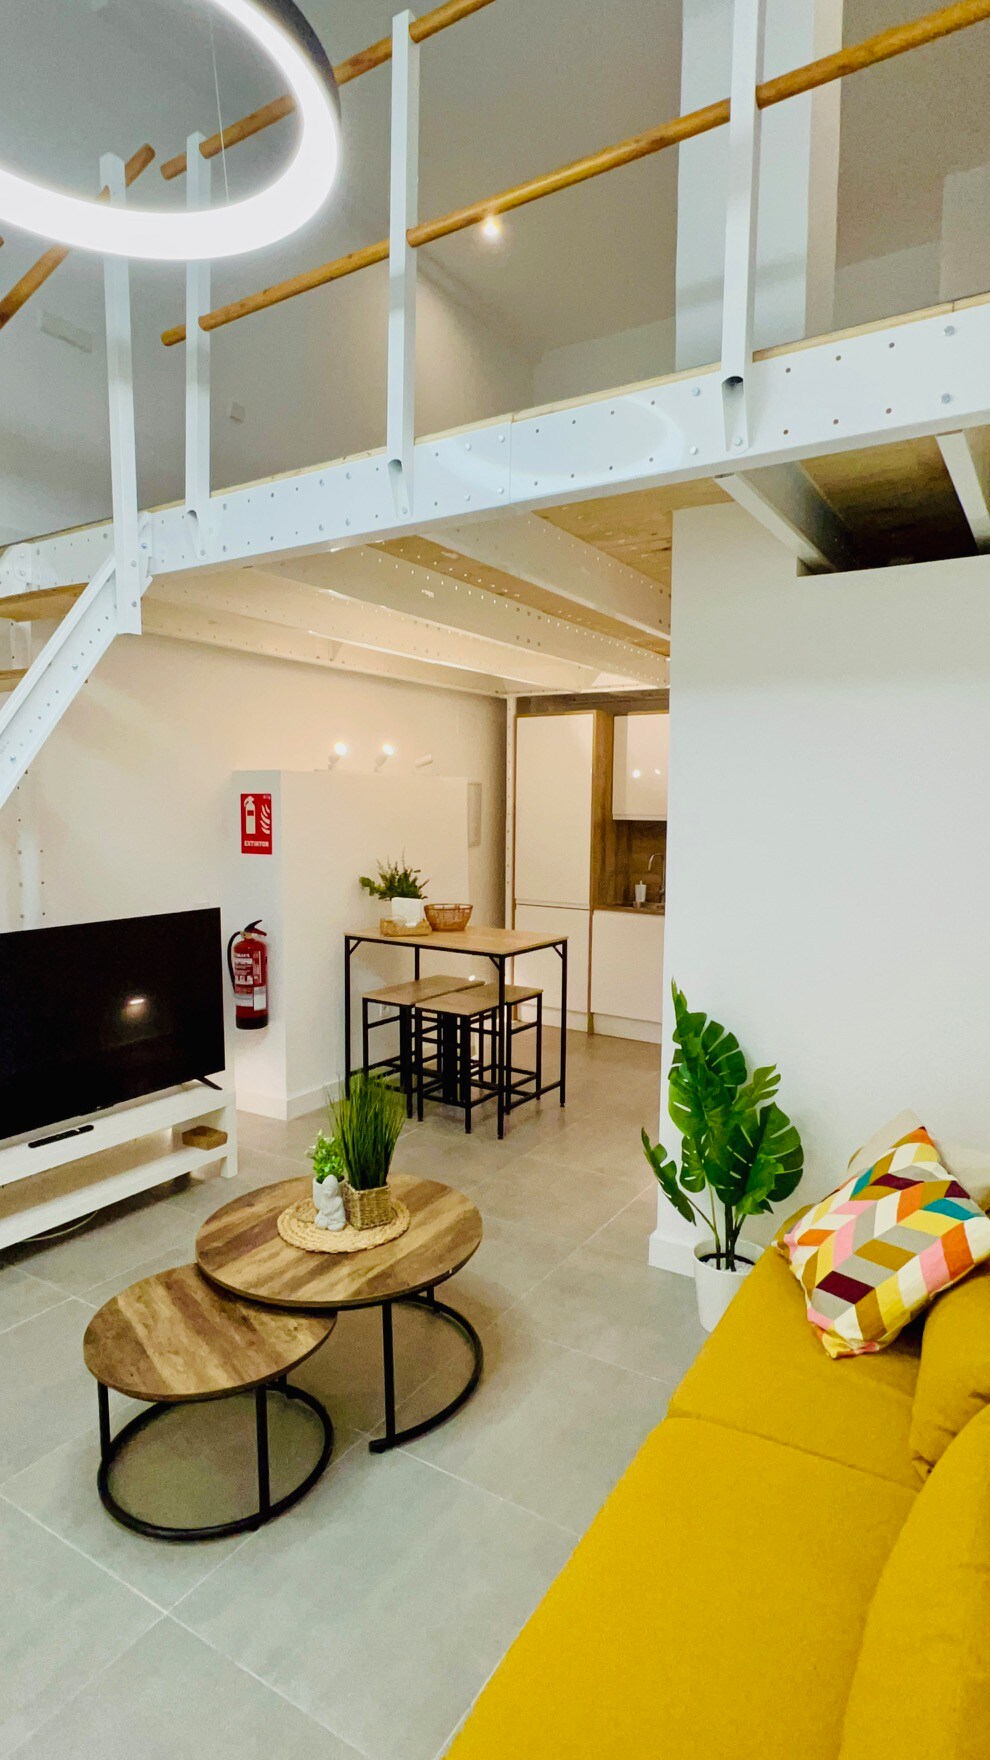 Loft 10 minutes away from the center of Madrid